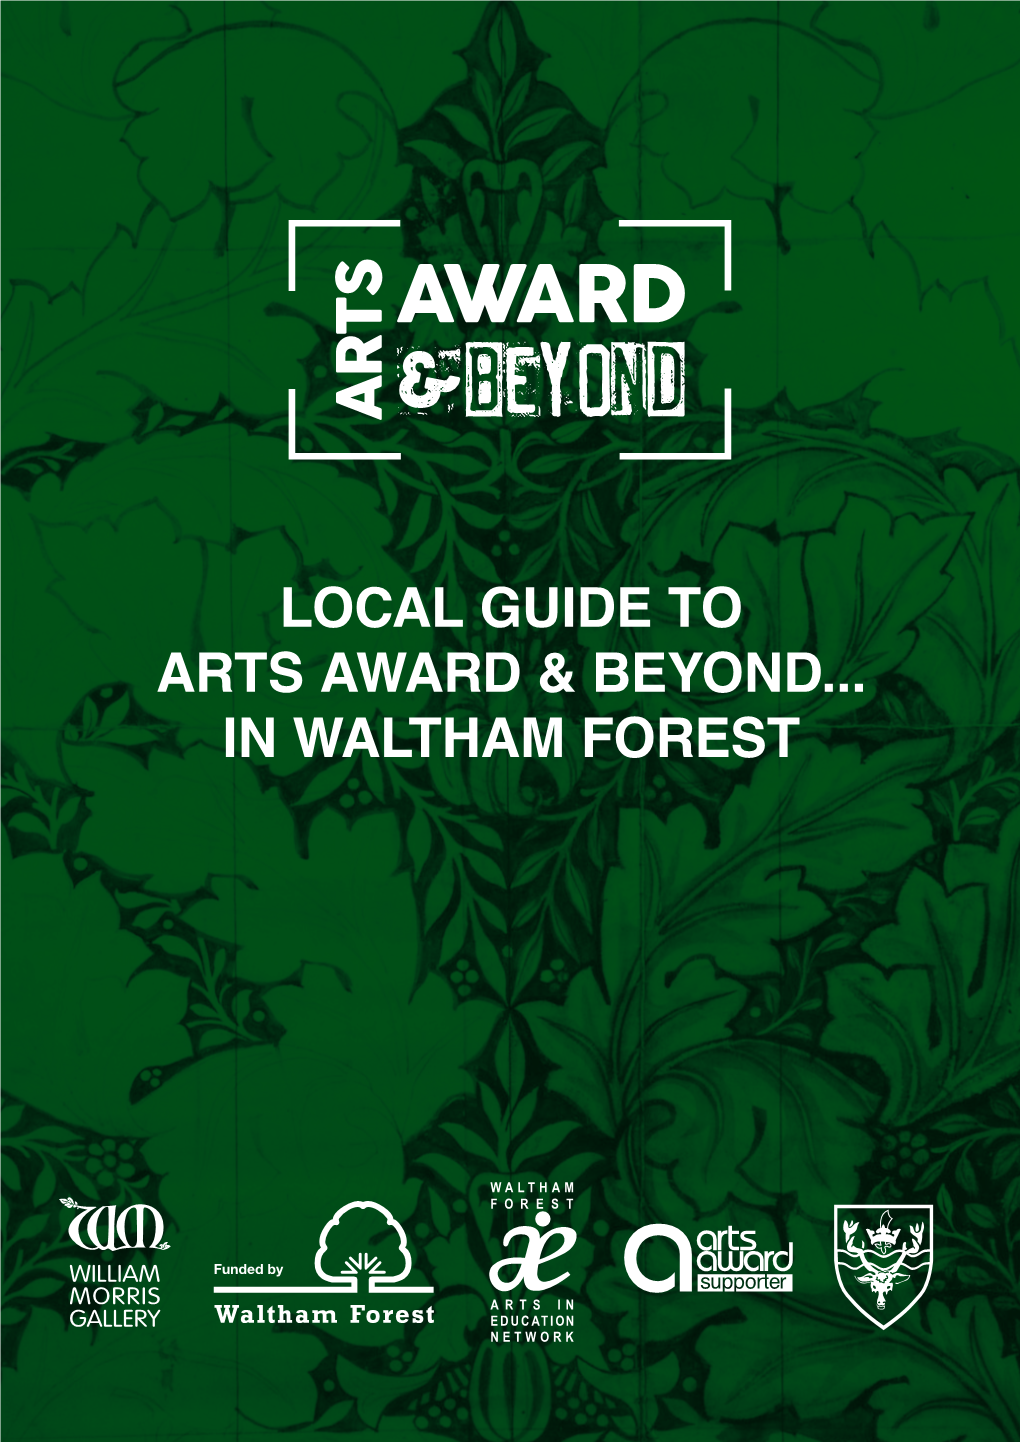 Local Guide to Arts Award & Beyond... in Waltham Forest